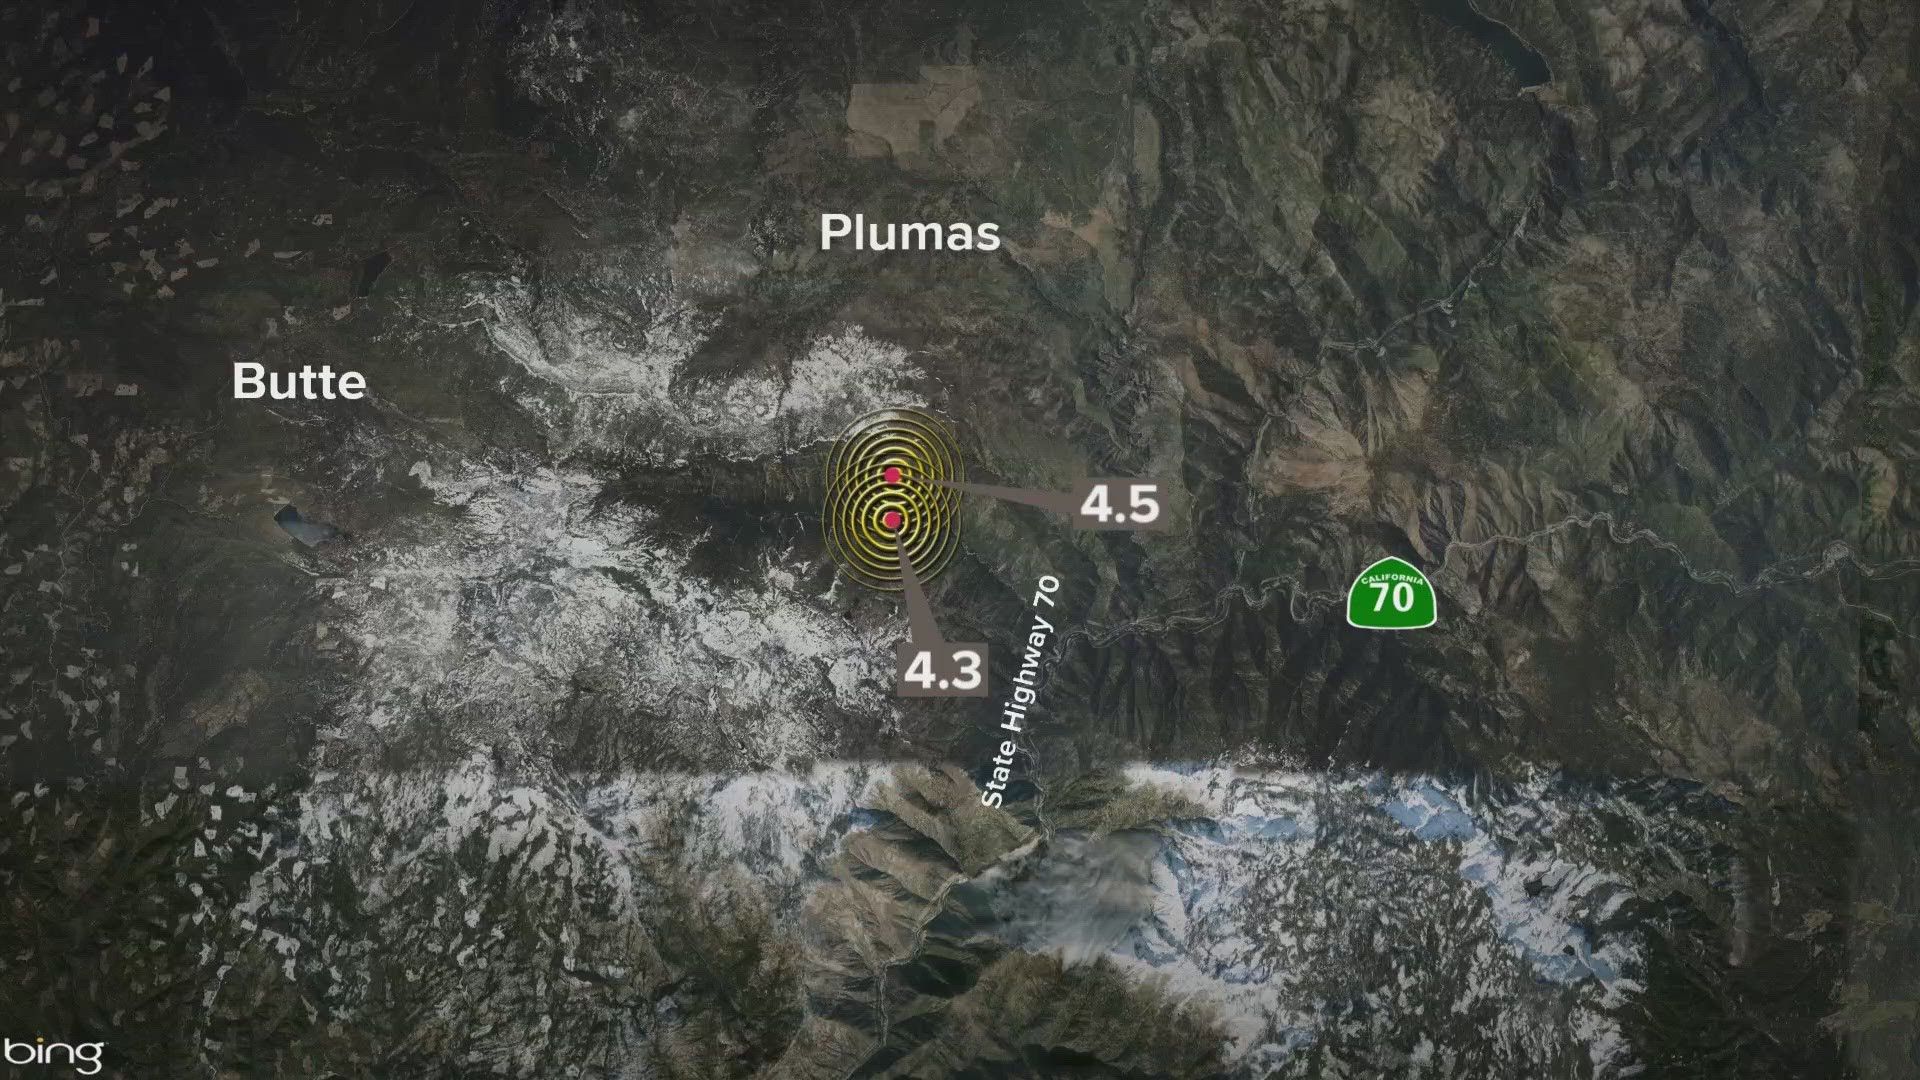 Plumas County hit by an earthquake doublet on Thursday, something that's not common to see happen.